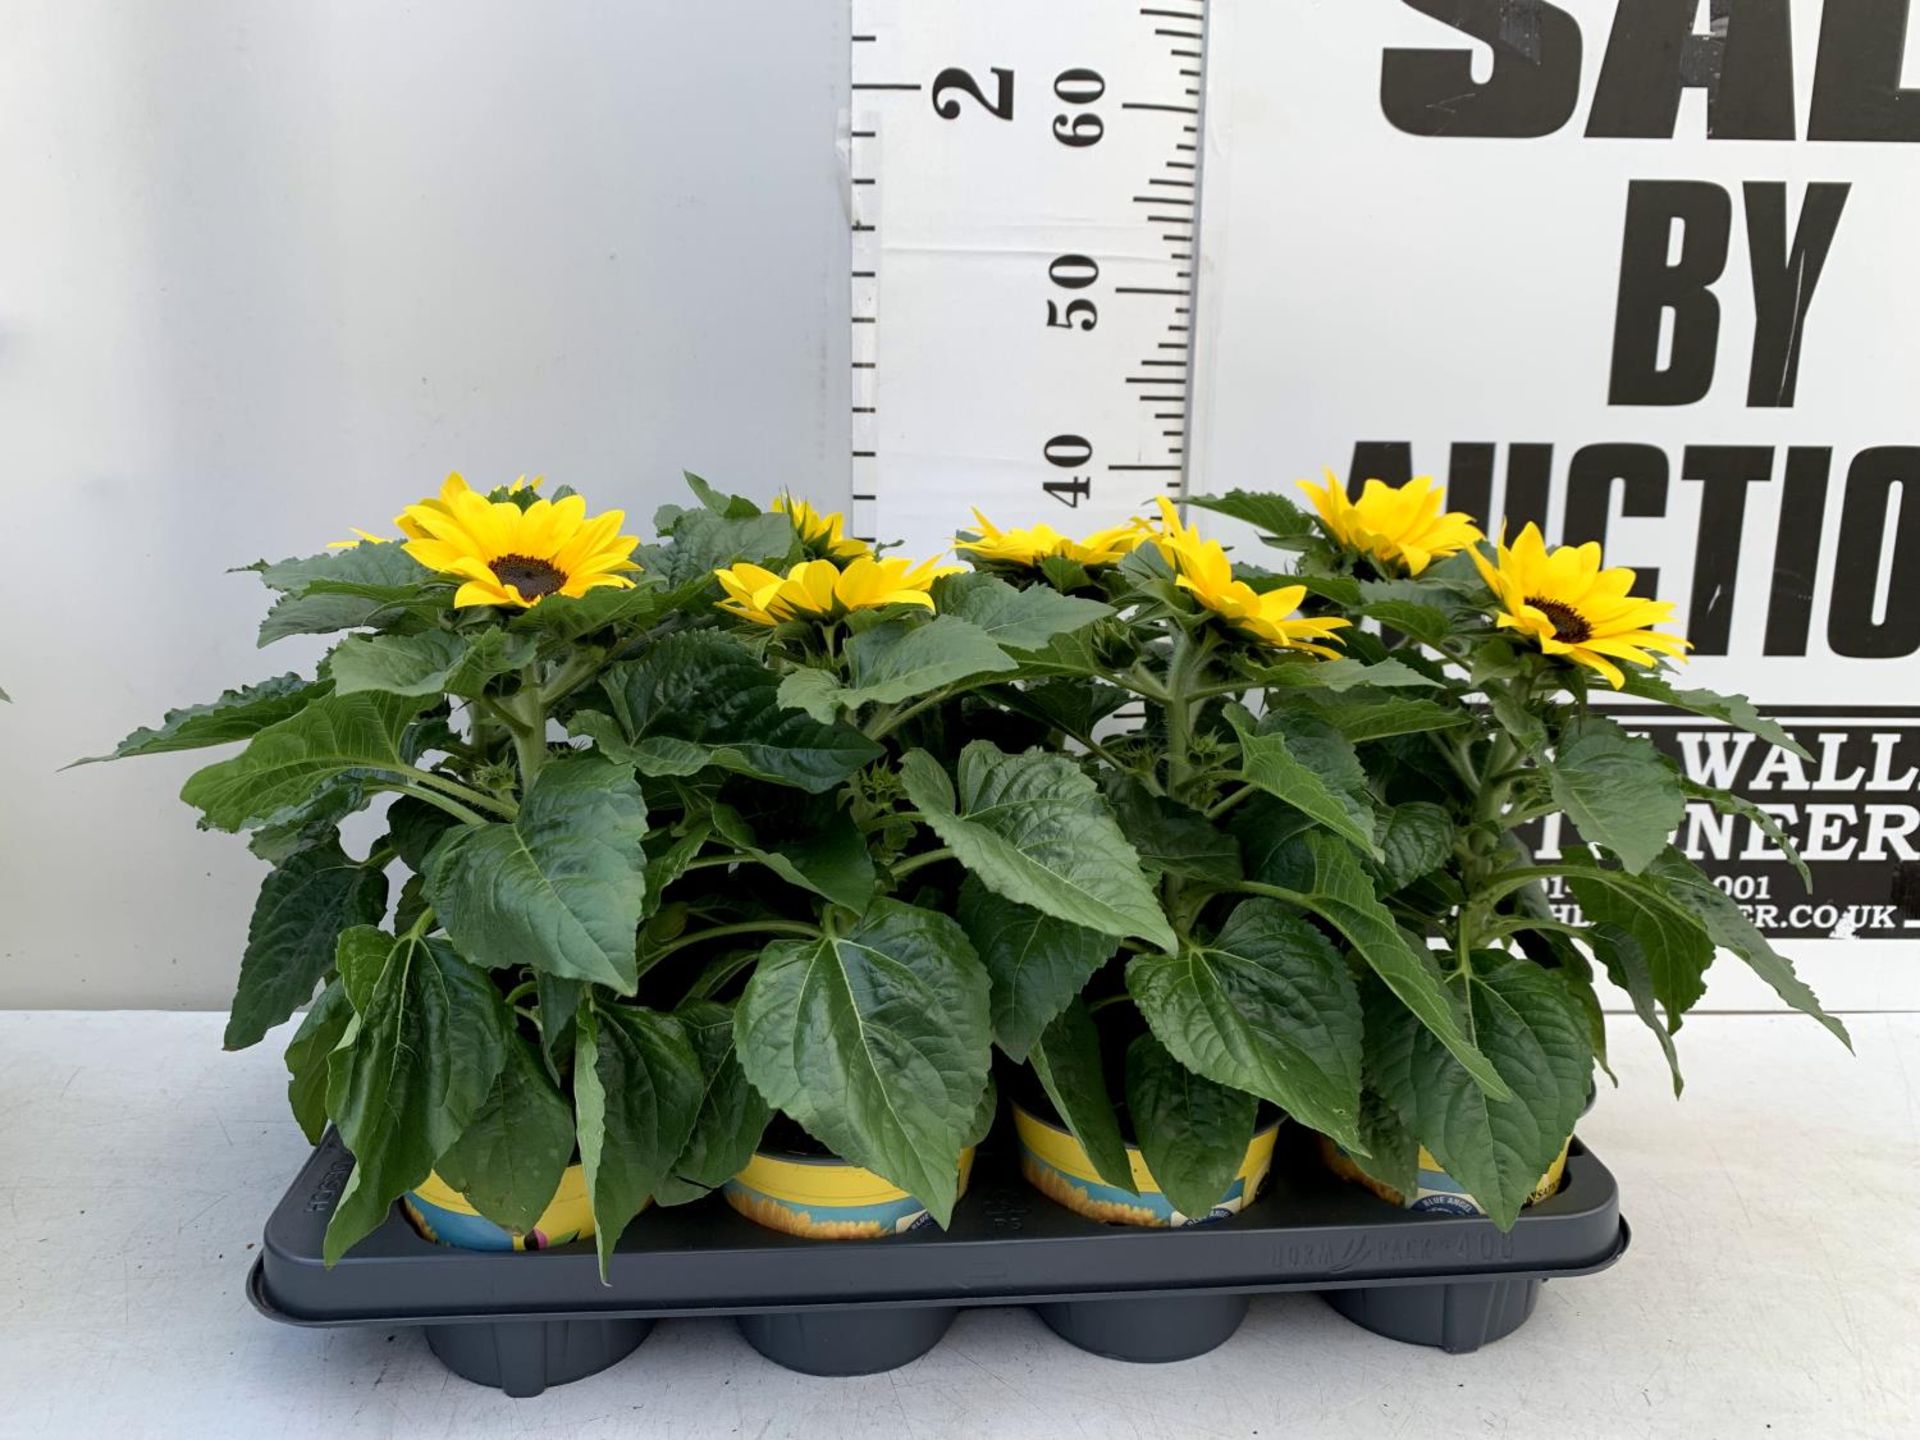 EIGHT SUNFLOWERS HELIANTHUS ANNUUS SENSATION IN ONE LITRE POTS APPROX 35CM IN HEIGHT PLUS VAT TO